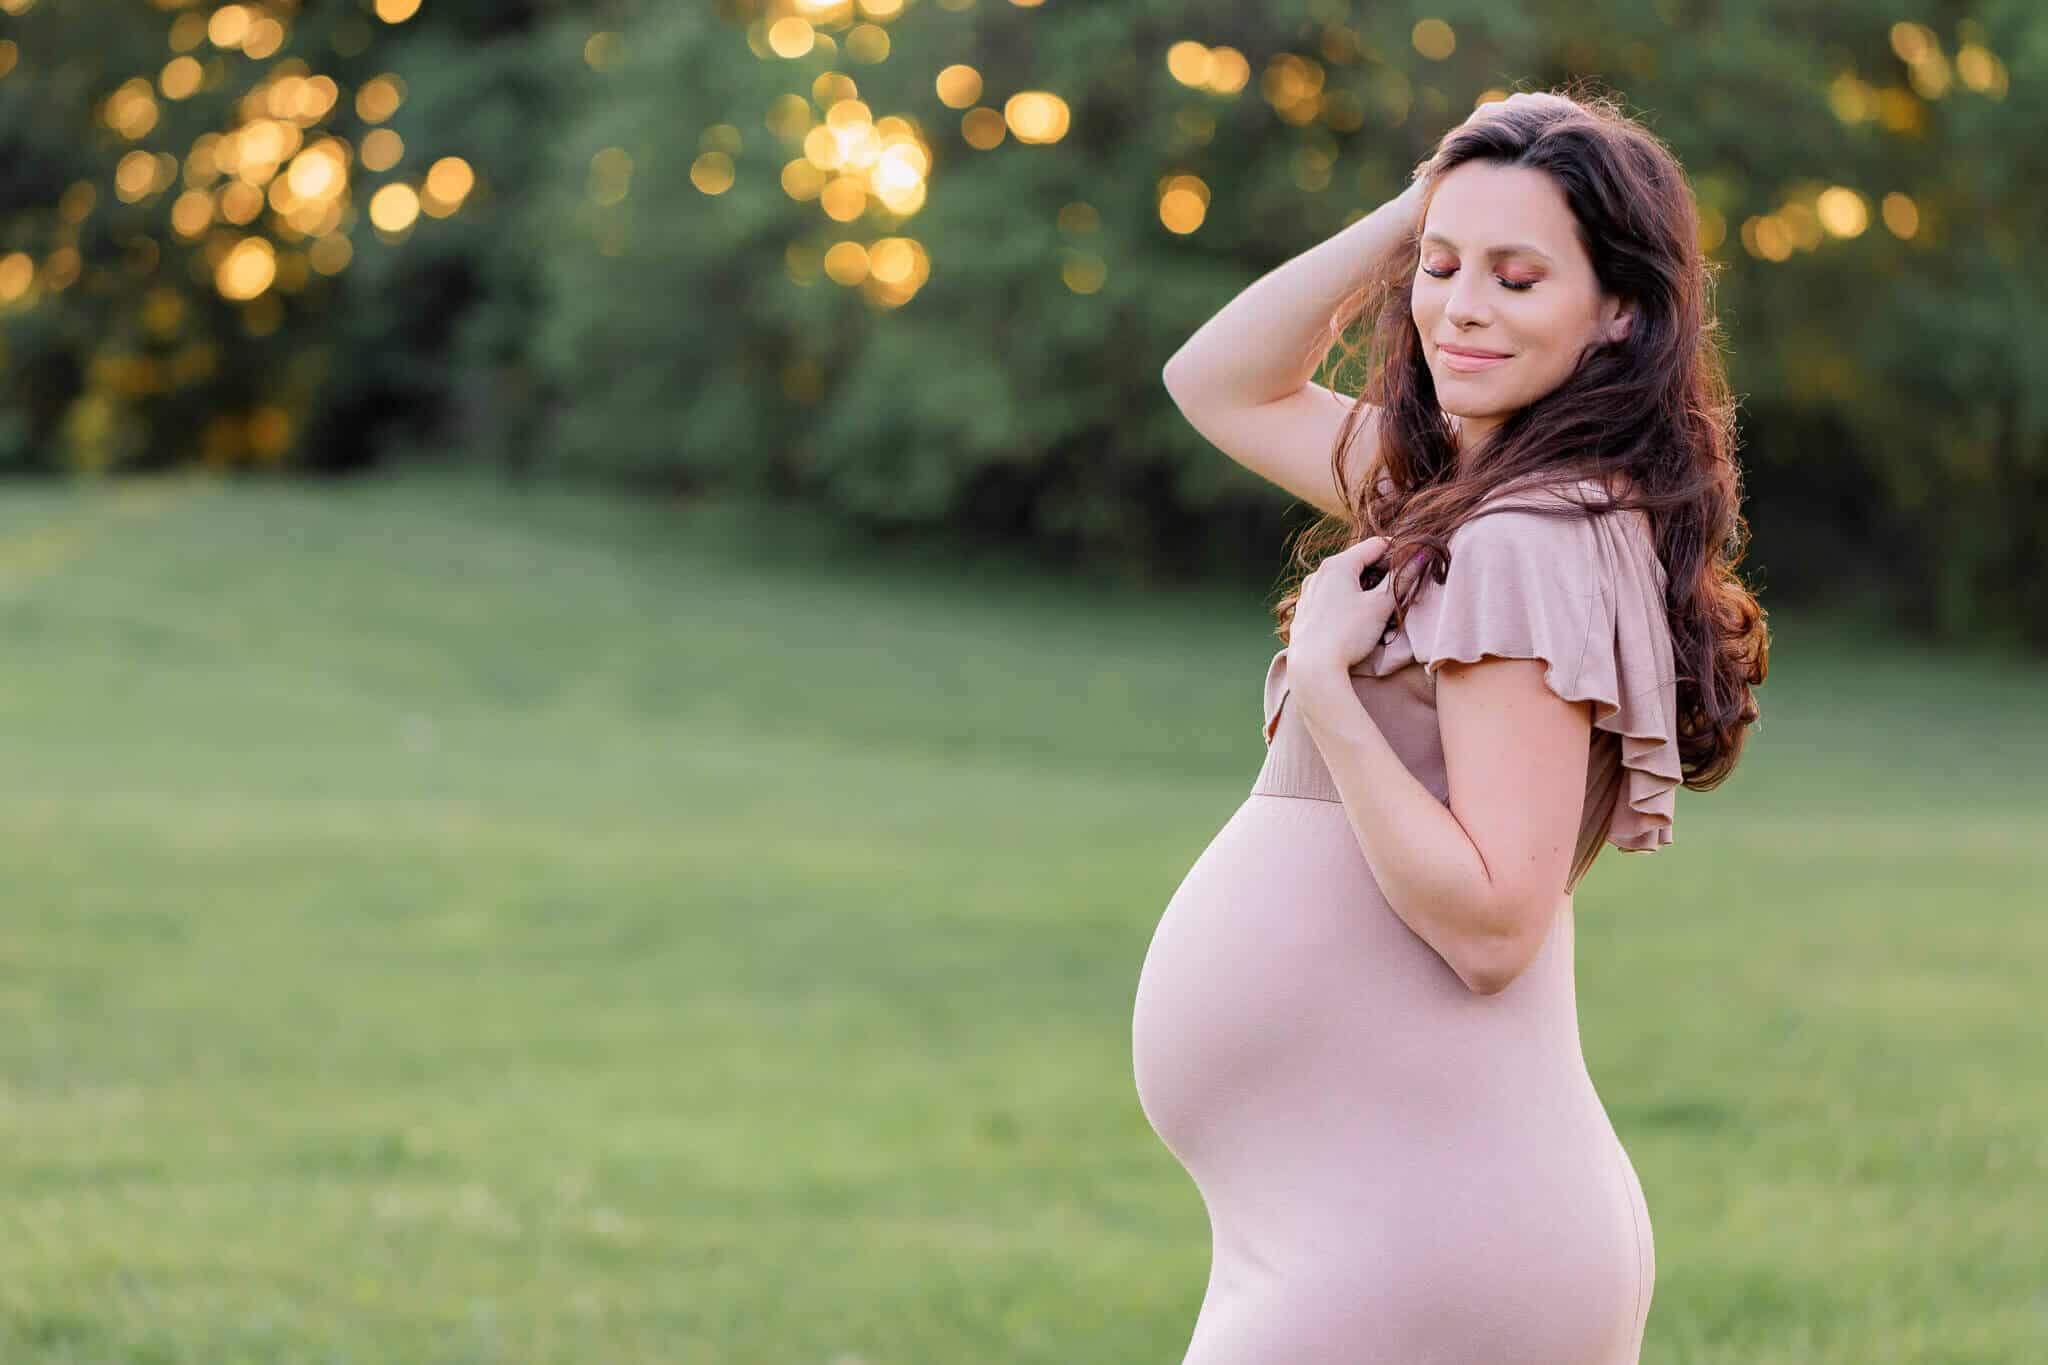 A photo of a beautiful mother-to-be posing in a field at sunset being featured on a blog about Momease.